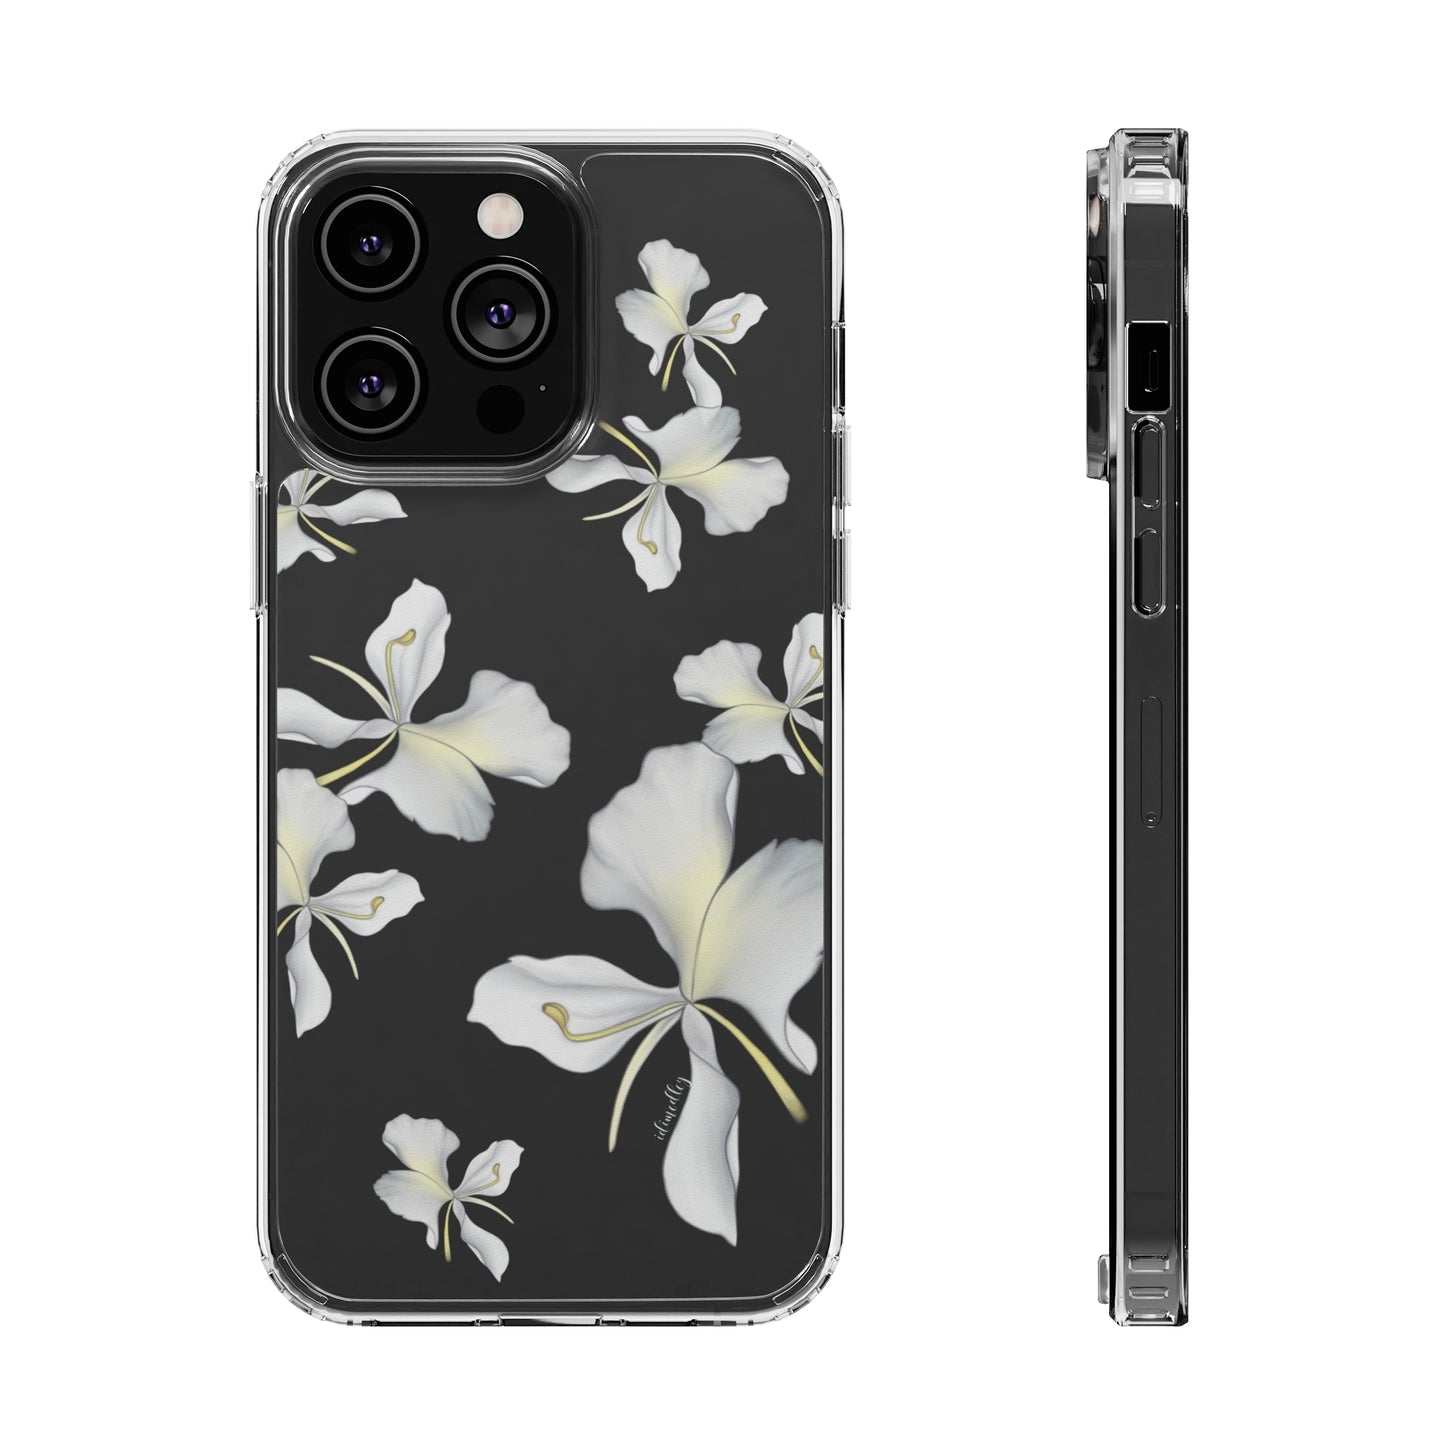 Awapuhi Butterfly Ginger Falling Flowers CLEAR Case